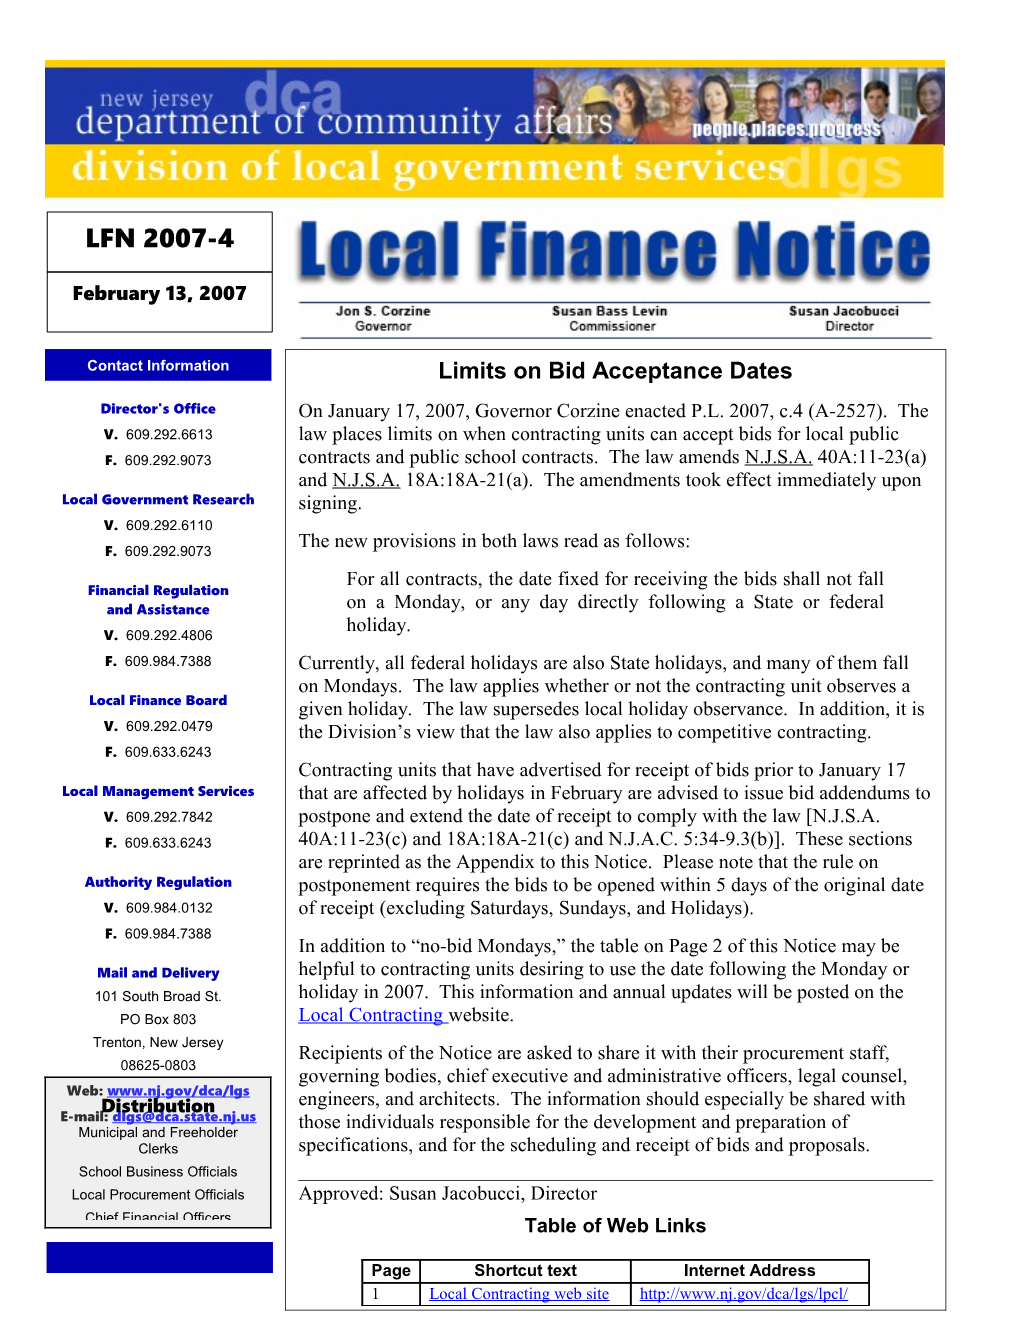 Local Finance Notice 2007-4February 13, 2007Page 1